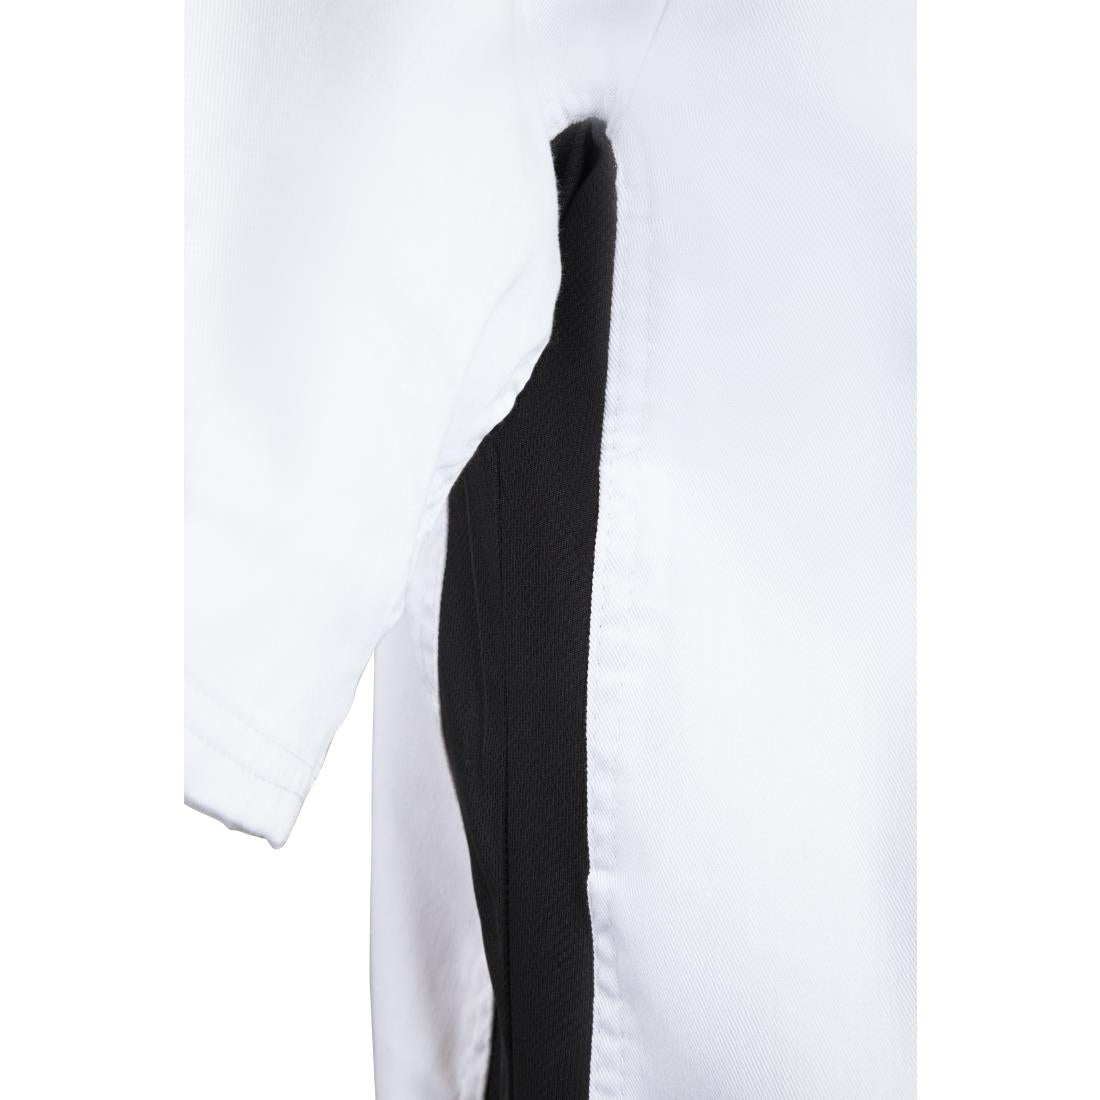 A928-XXL Whites Nevada Unisex Chefs Jacket Short Sleeve Black and White 2XL JD Catering Equipment Solutions Ltd